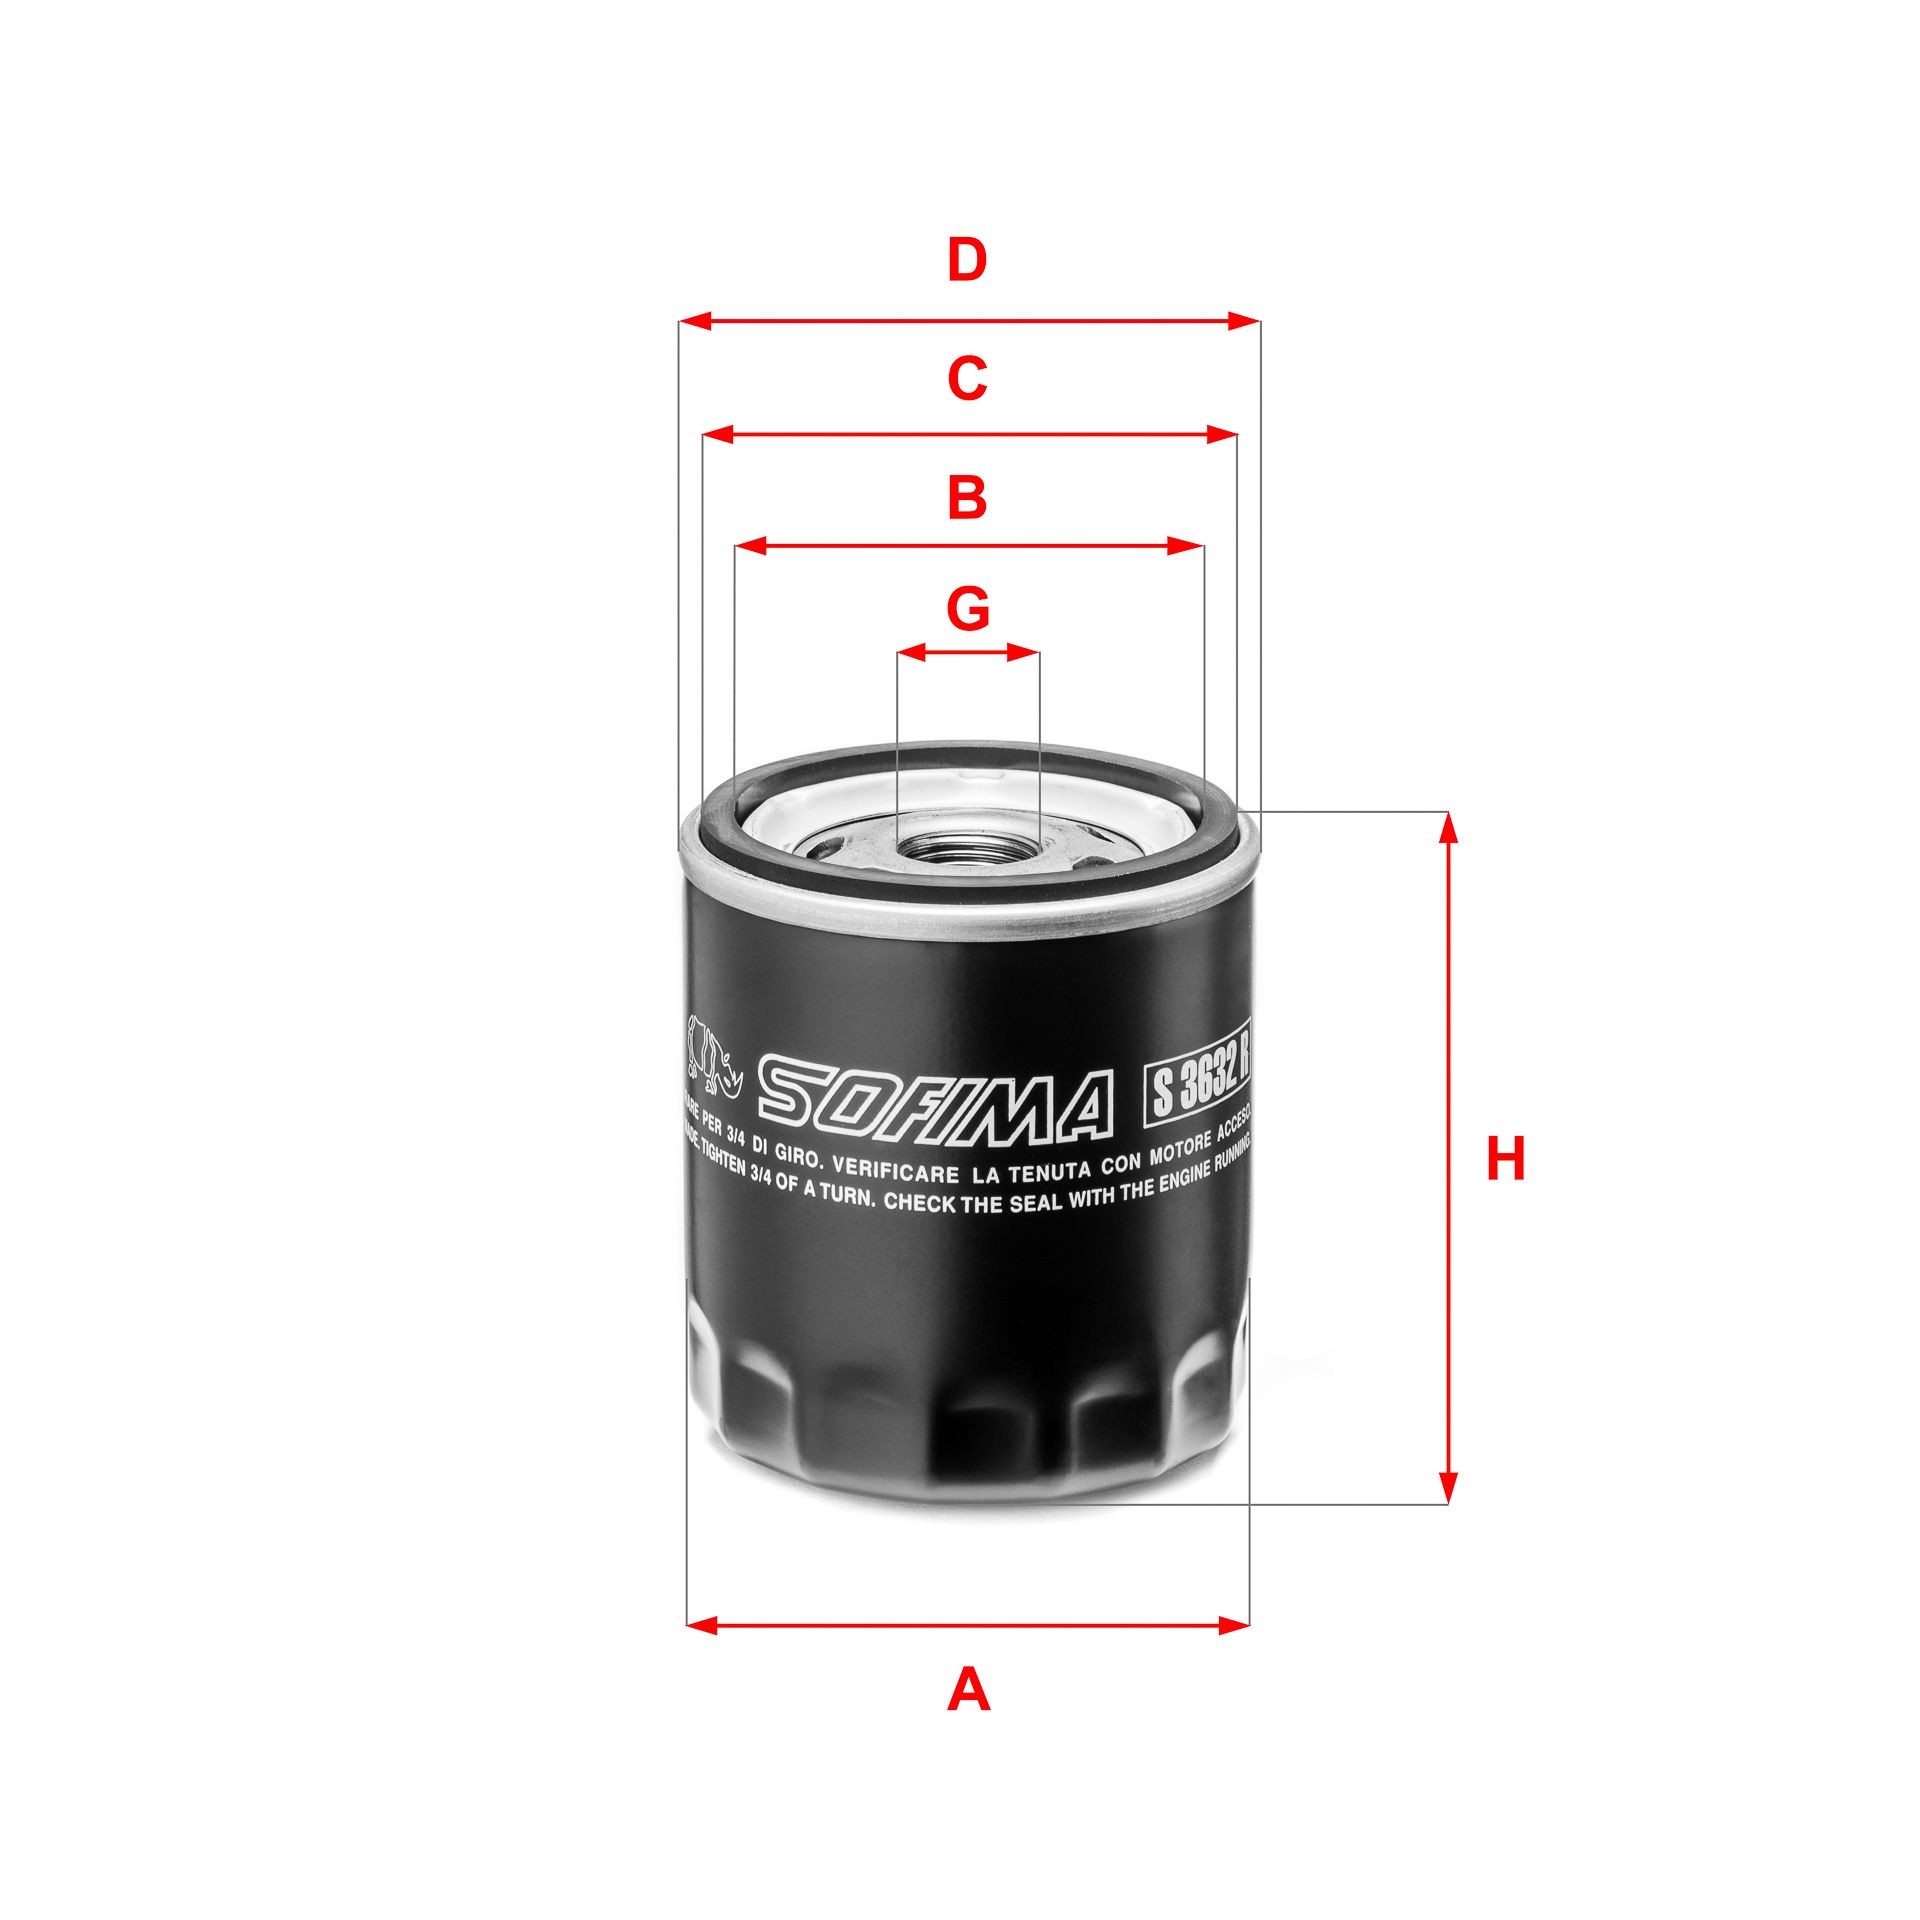 SOFIMA S 3632 R Oil filter 3/4-16 UNF, Spin-on Filter